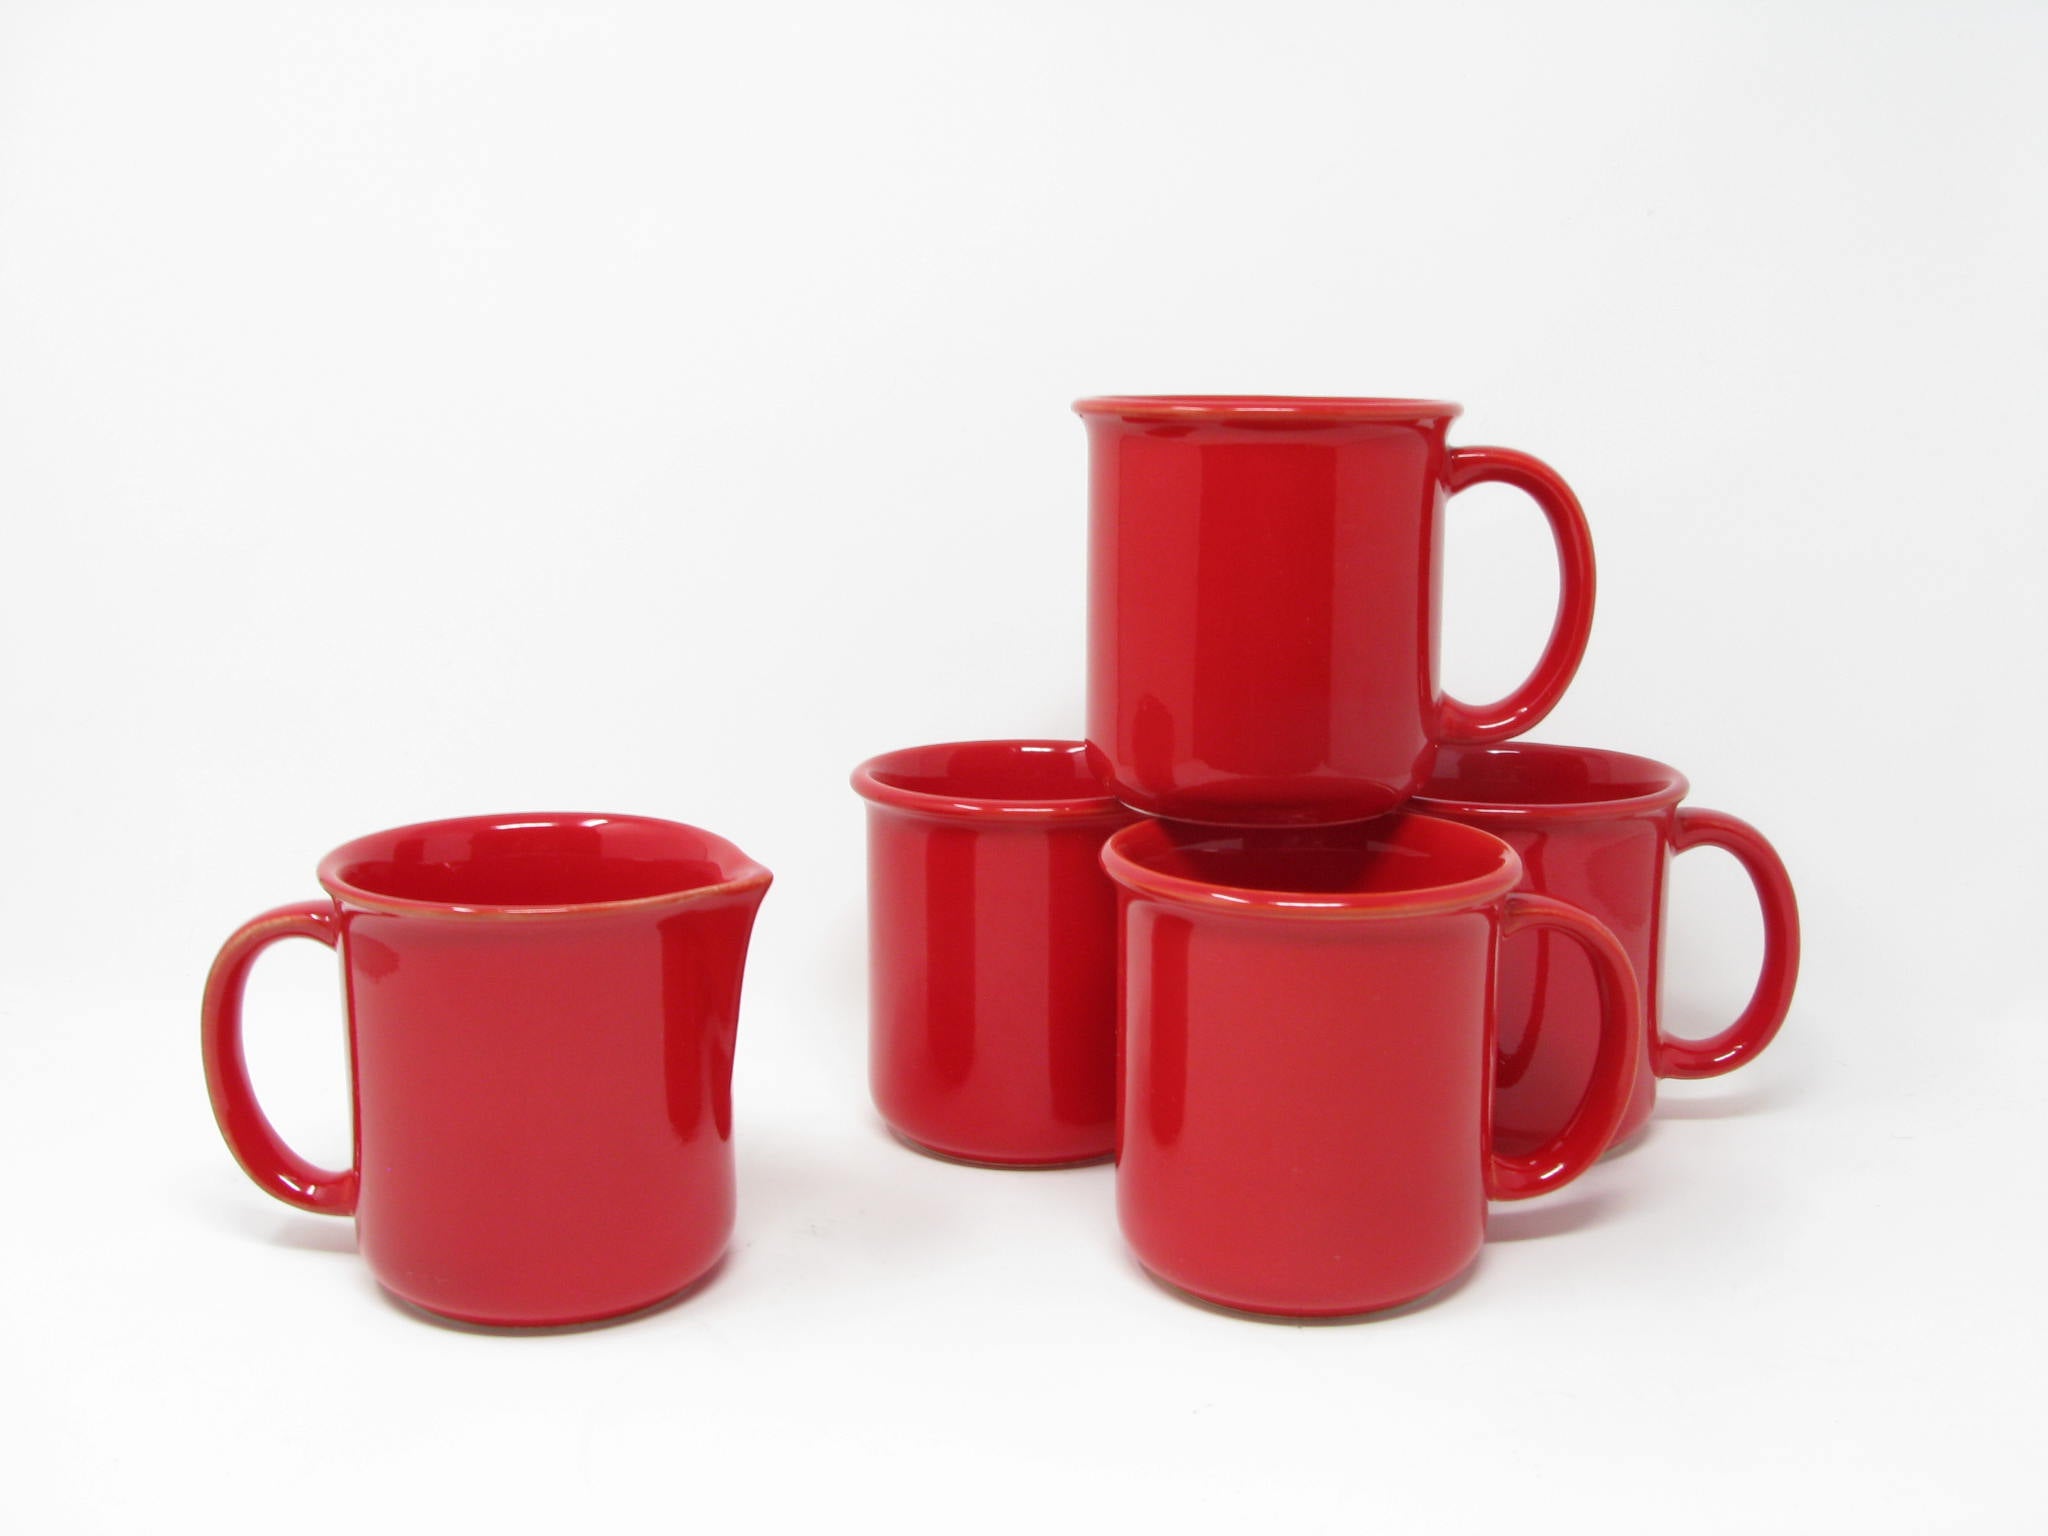 edgebrookhouse - Vintage Crown Corning Japan Prego Red Ceramic Mugs and Creamer - 5 Pieces